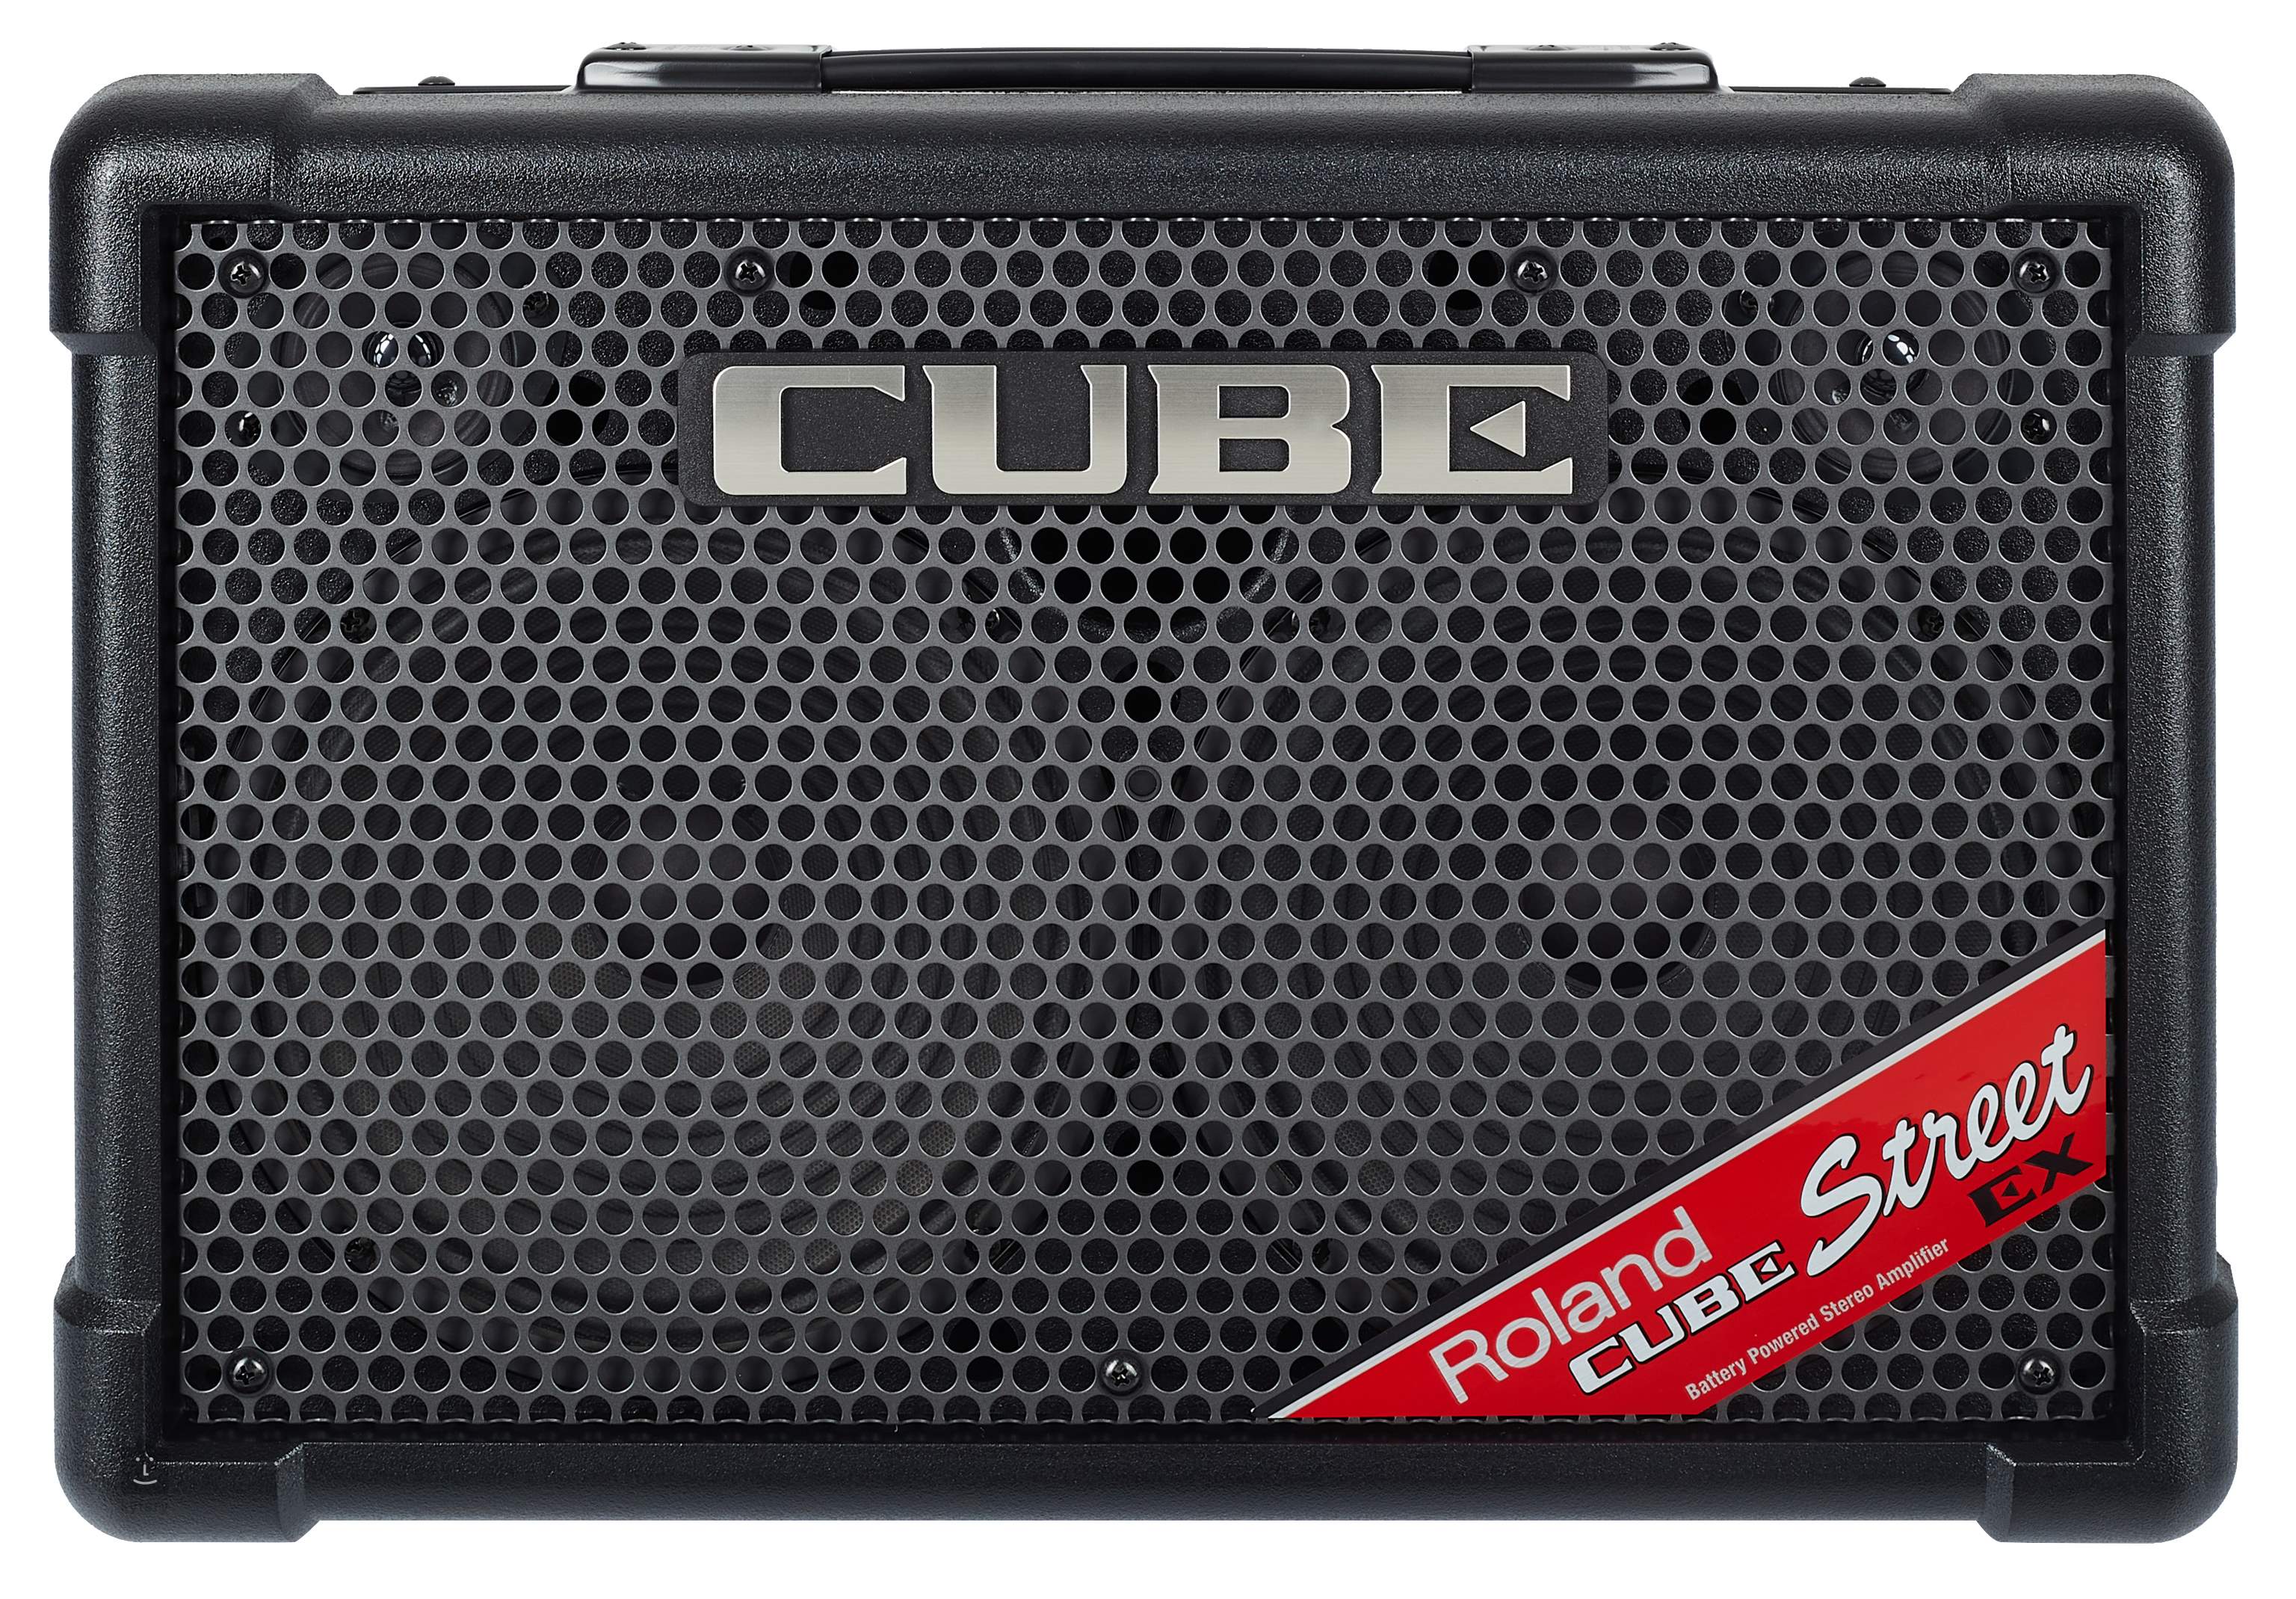 ROLAND Cube Street EX (opened) Guitar Modelling Combo | Kytary.ie